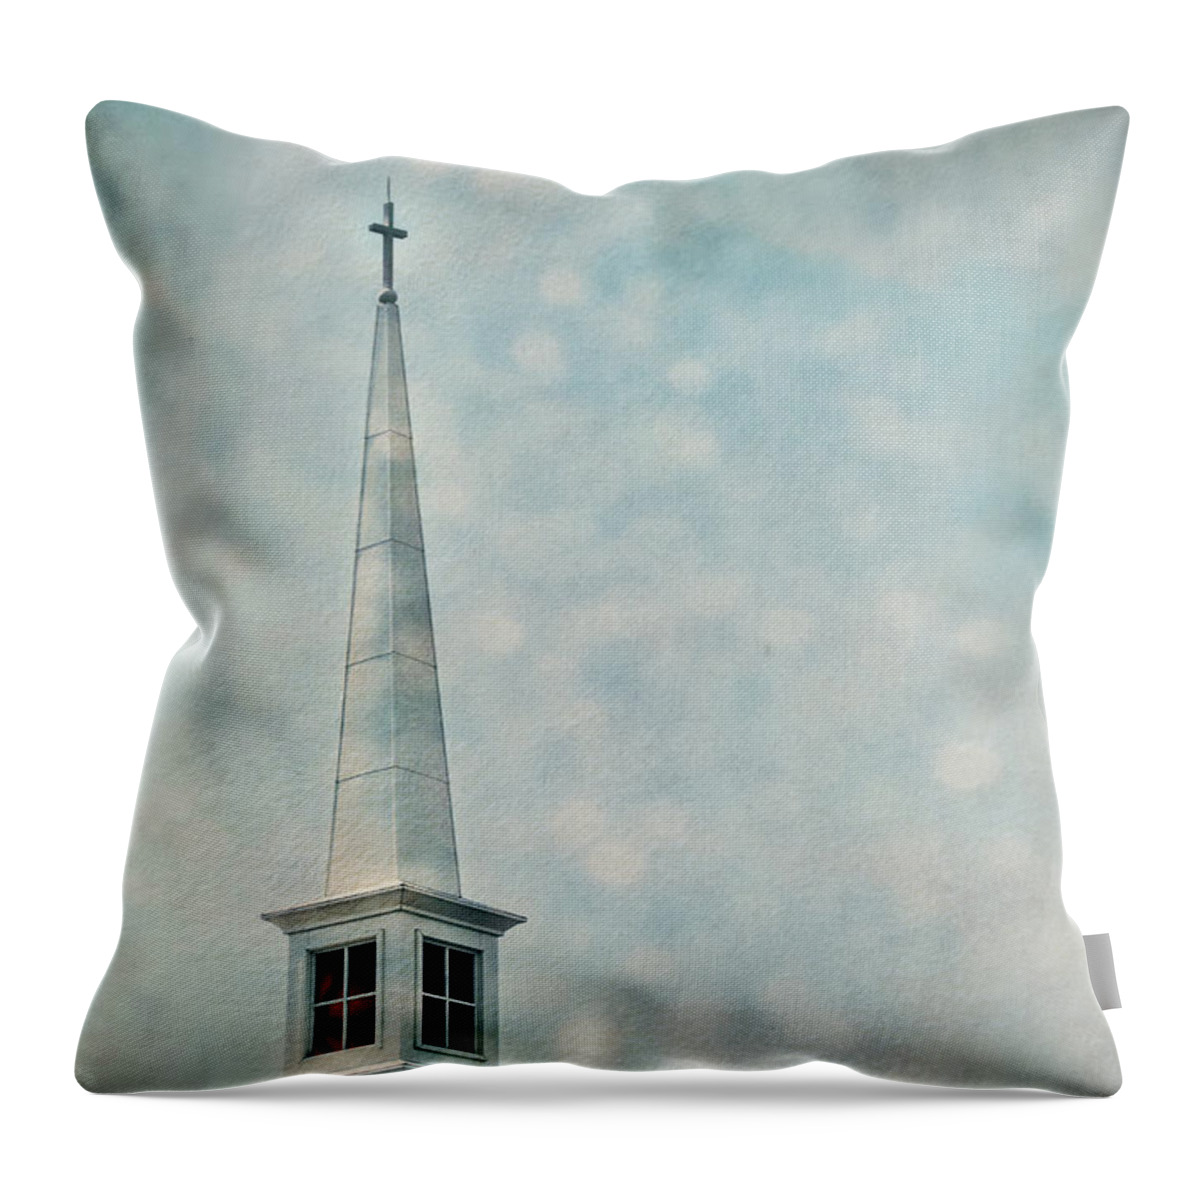 Christian Throw Pillow featuring the photograph Country Church by Stephanie Frey